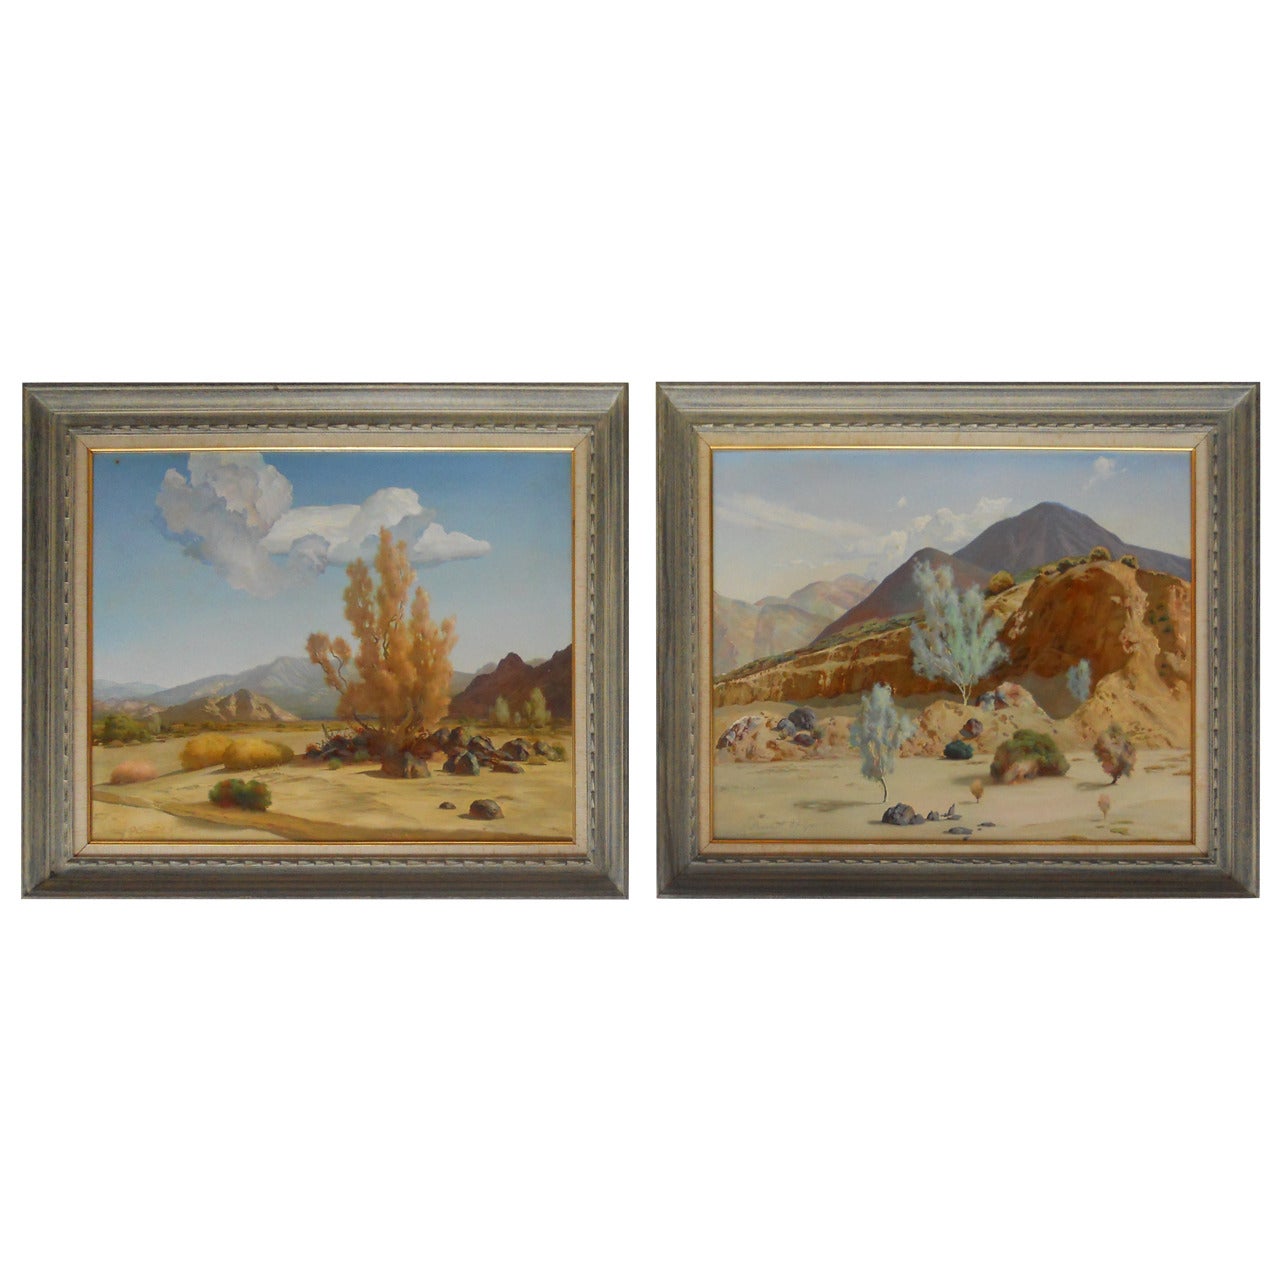 Charming Set of Two Oil Paintings by R. Brownell McGrew